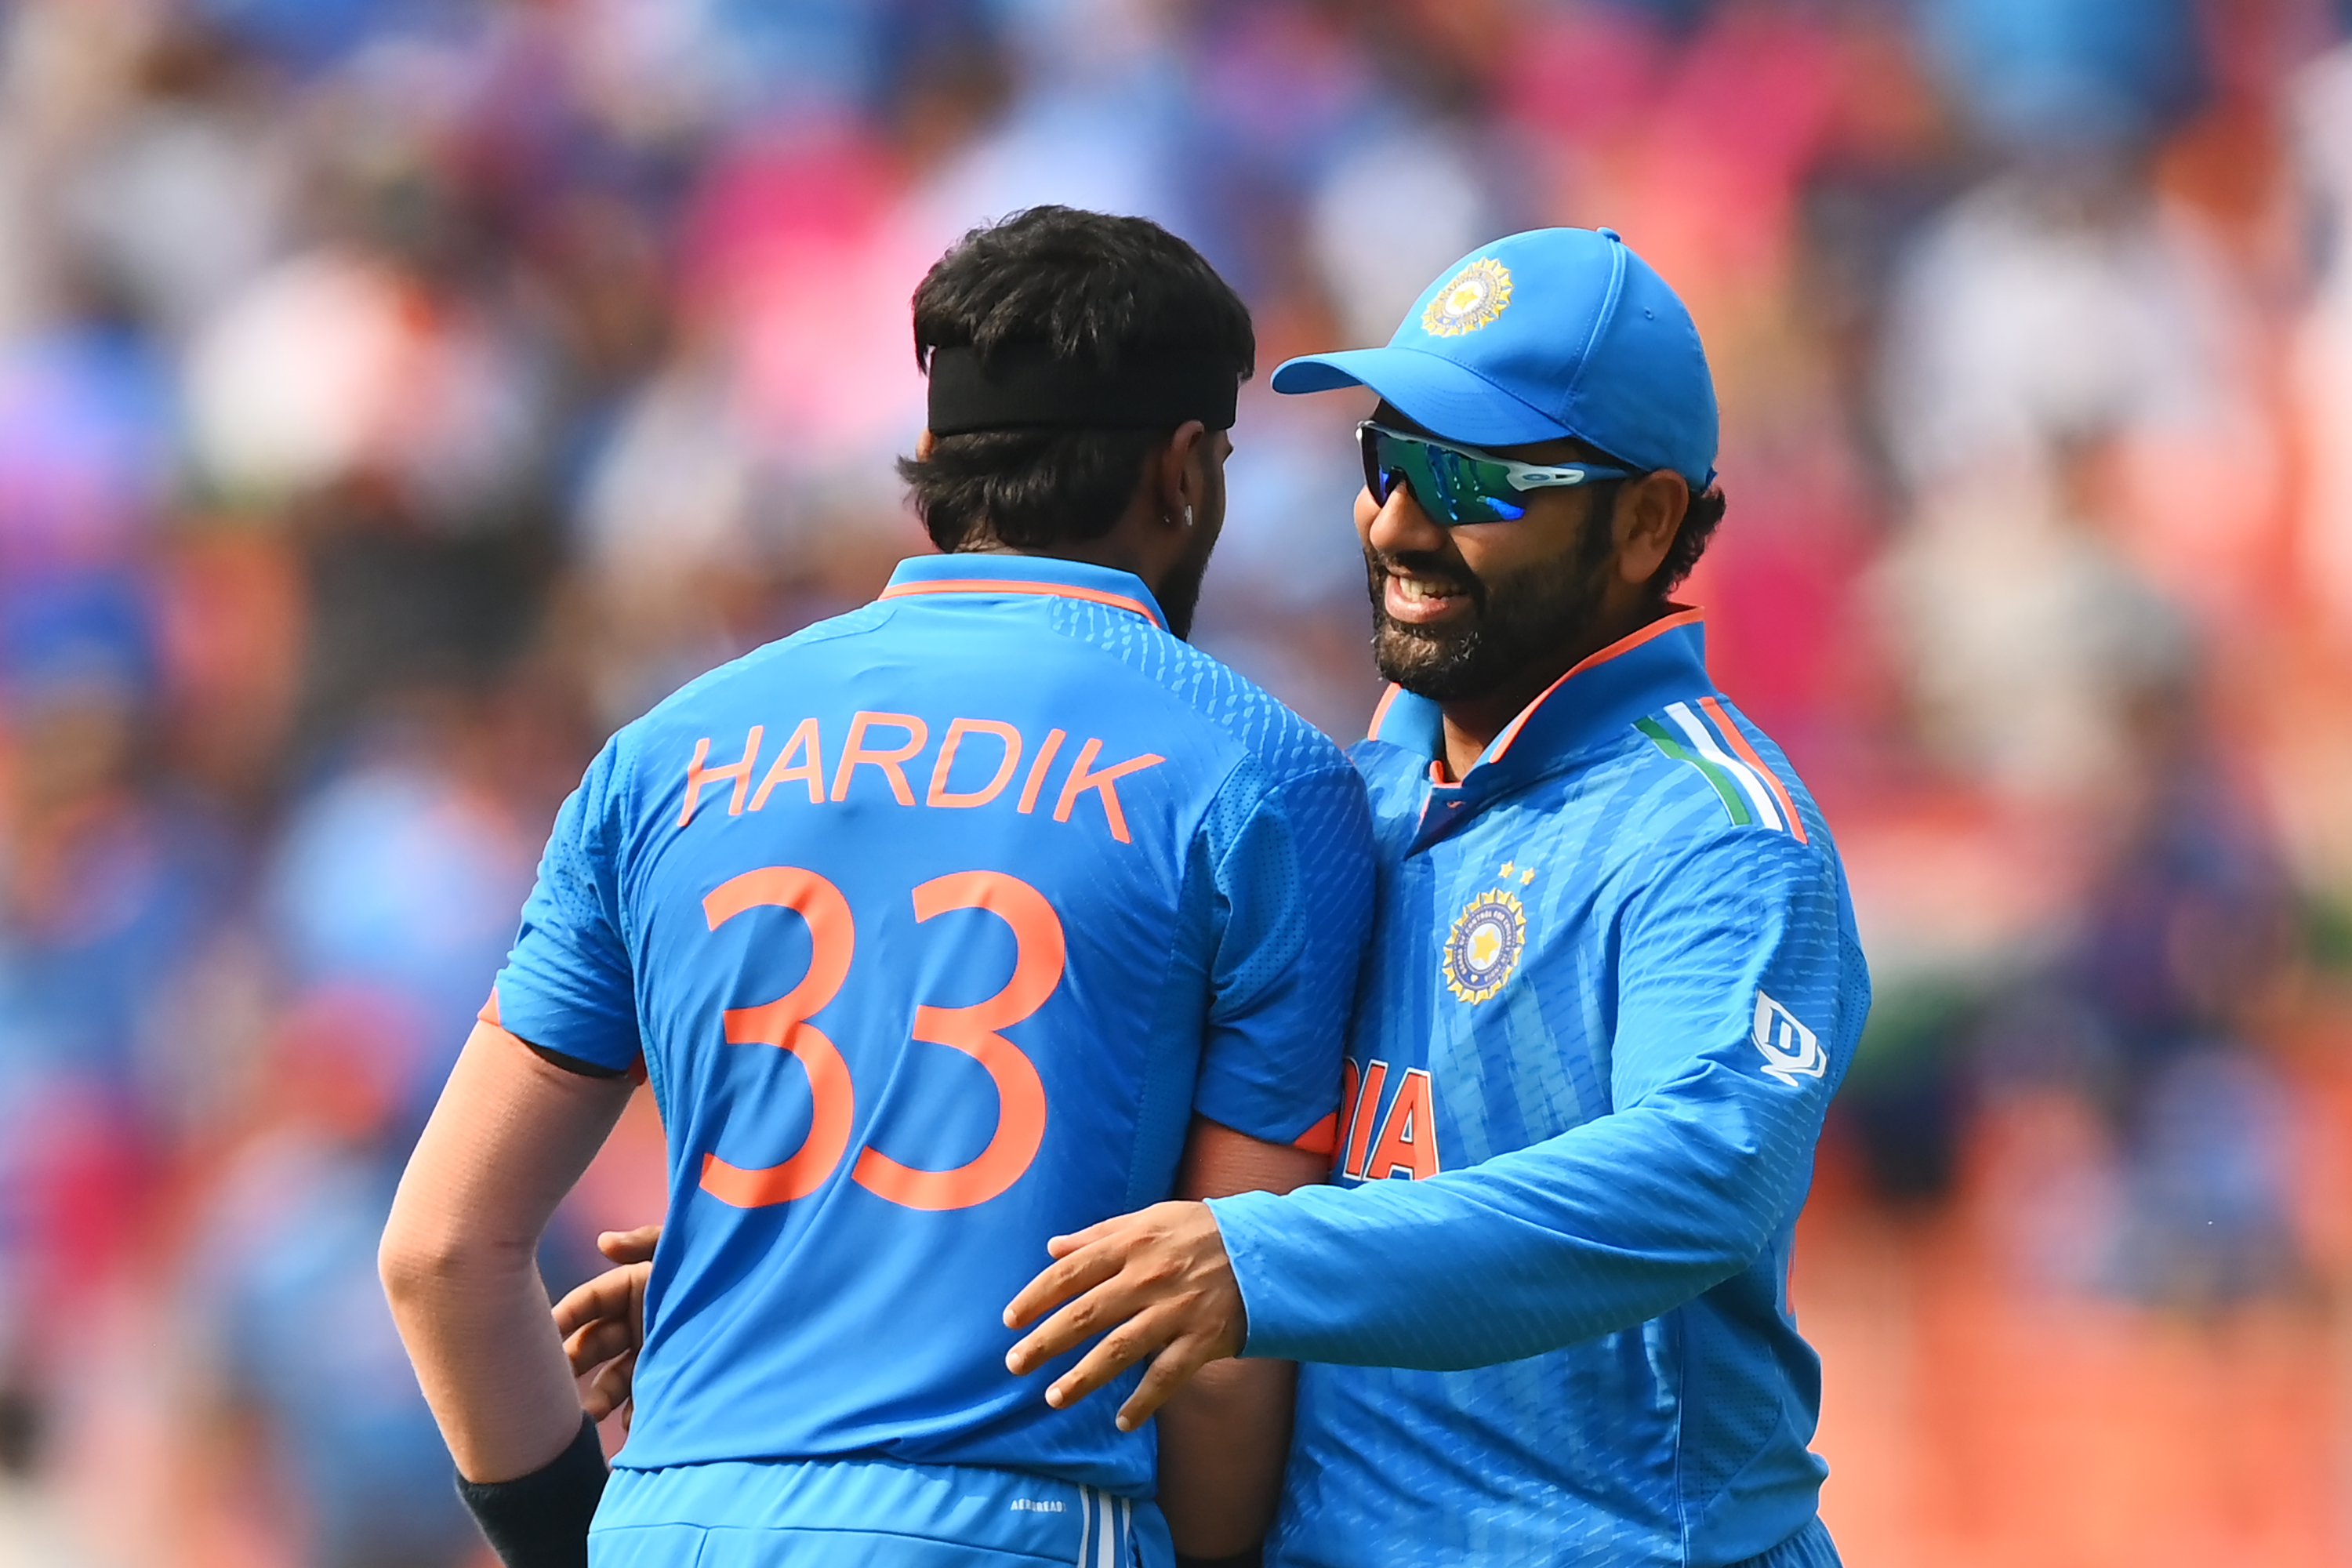 IND vs PAK | Twitter reacts to Pandya forcibly composing himself to earn priceless scalp of Imam-ul-Haq